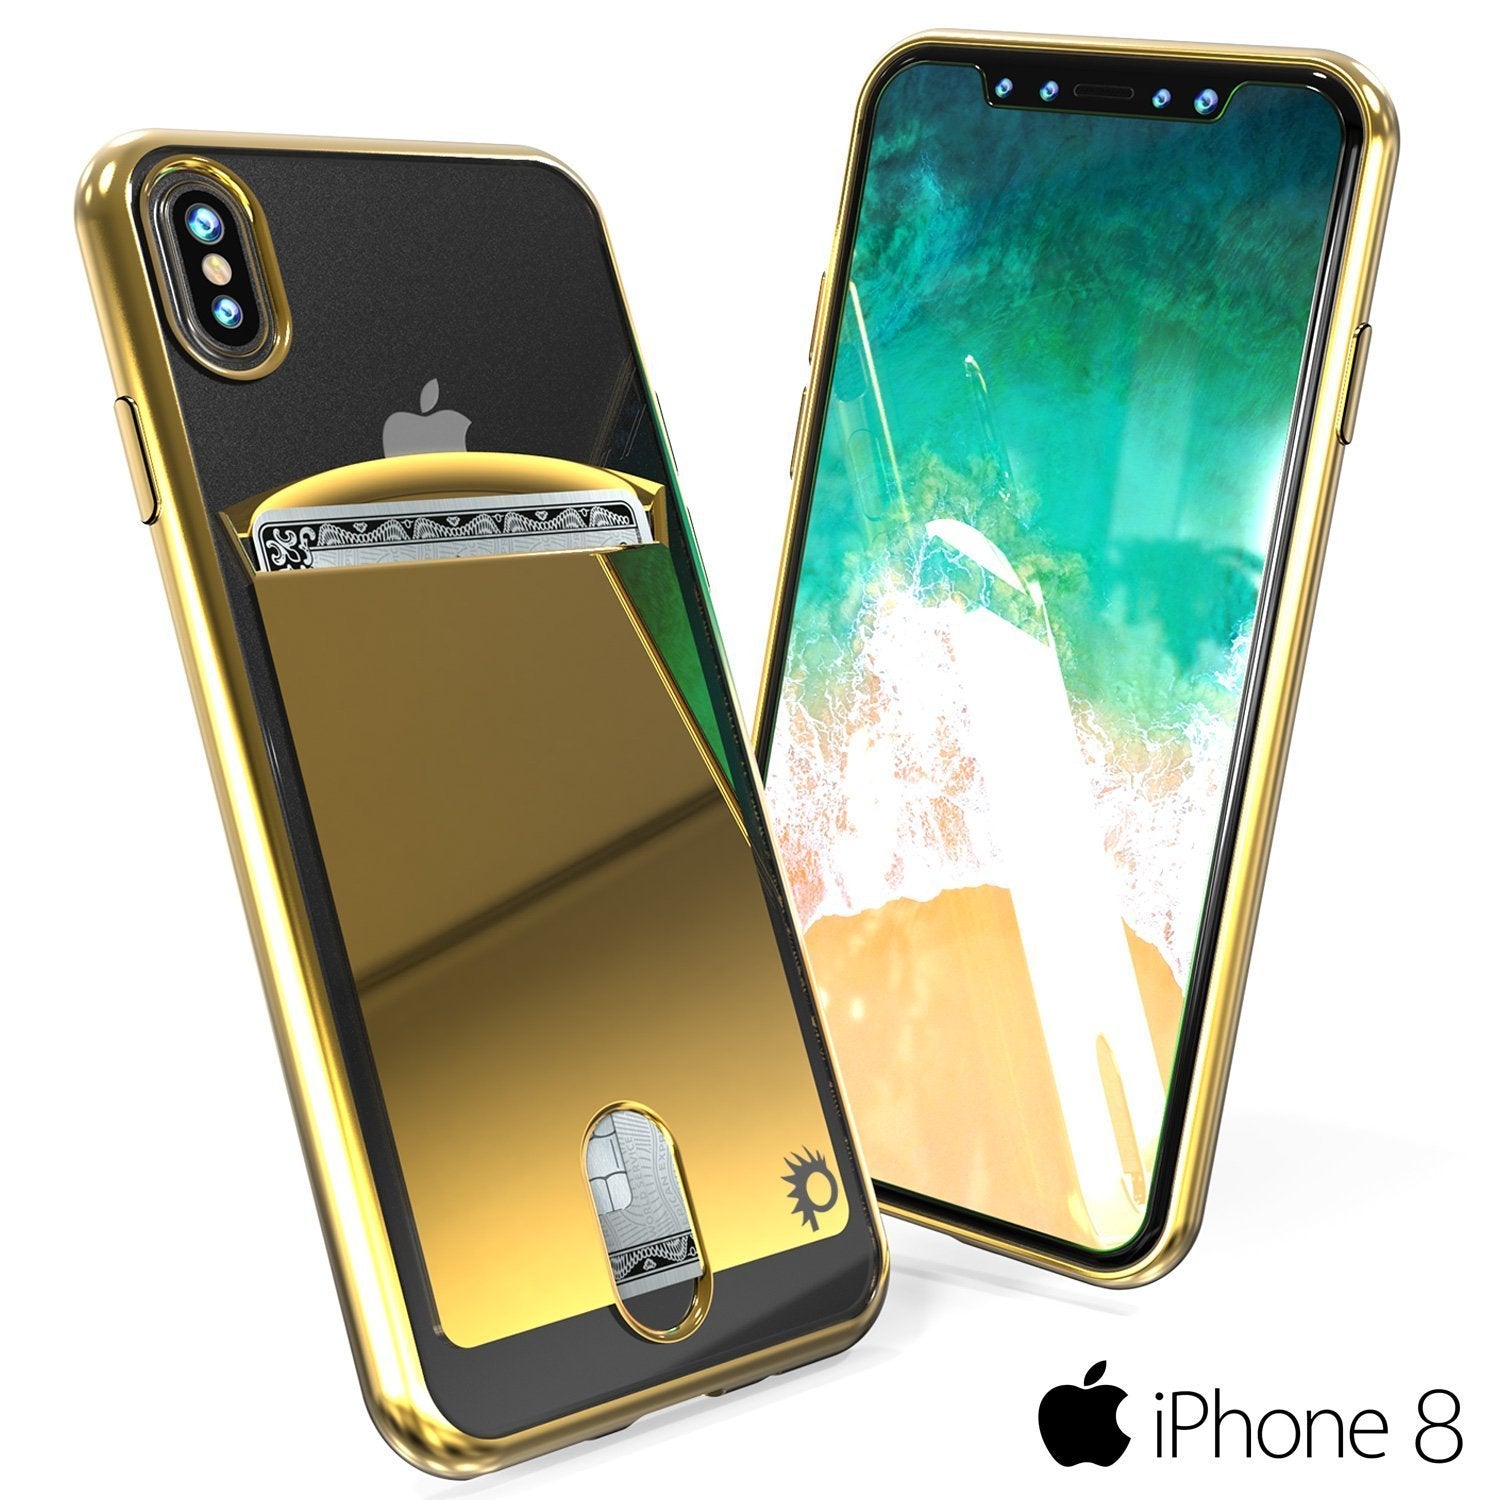 iPhone 8 Case, PUNKcase [LUCID Series] Slim Fit Protective Dual Layer Armor Cover W/ Scratch Resistant Screen Protector [GOLD]